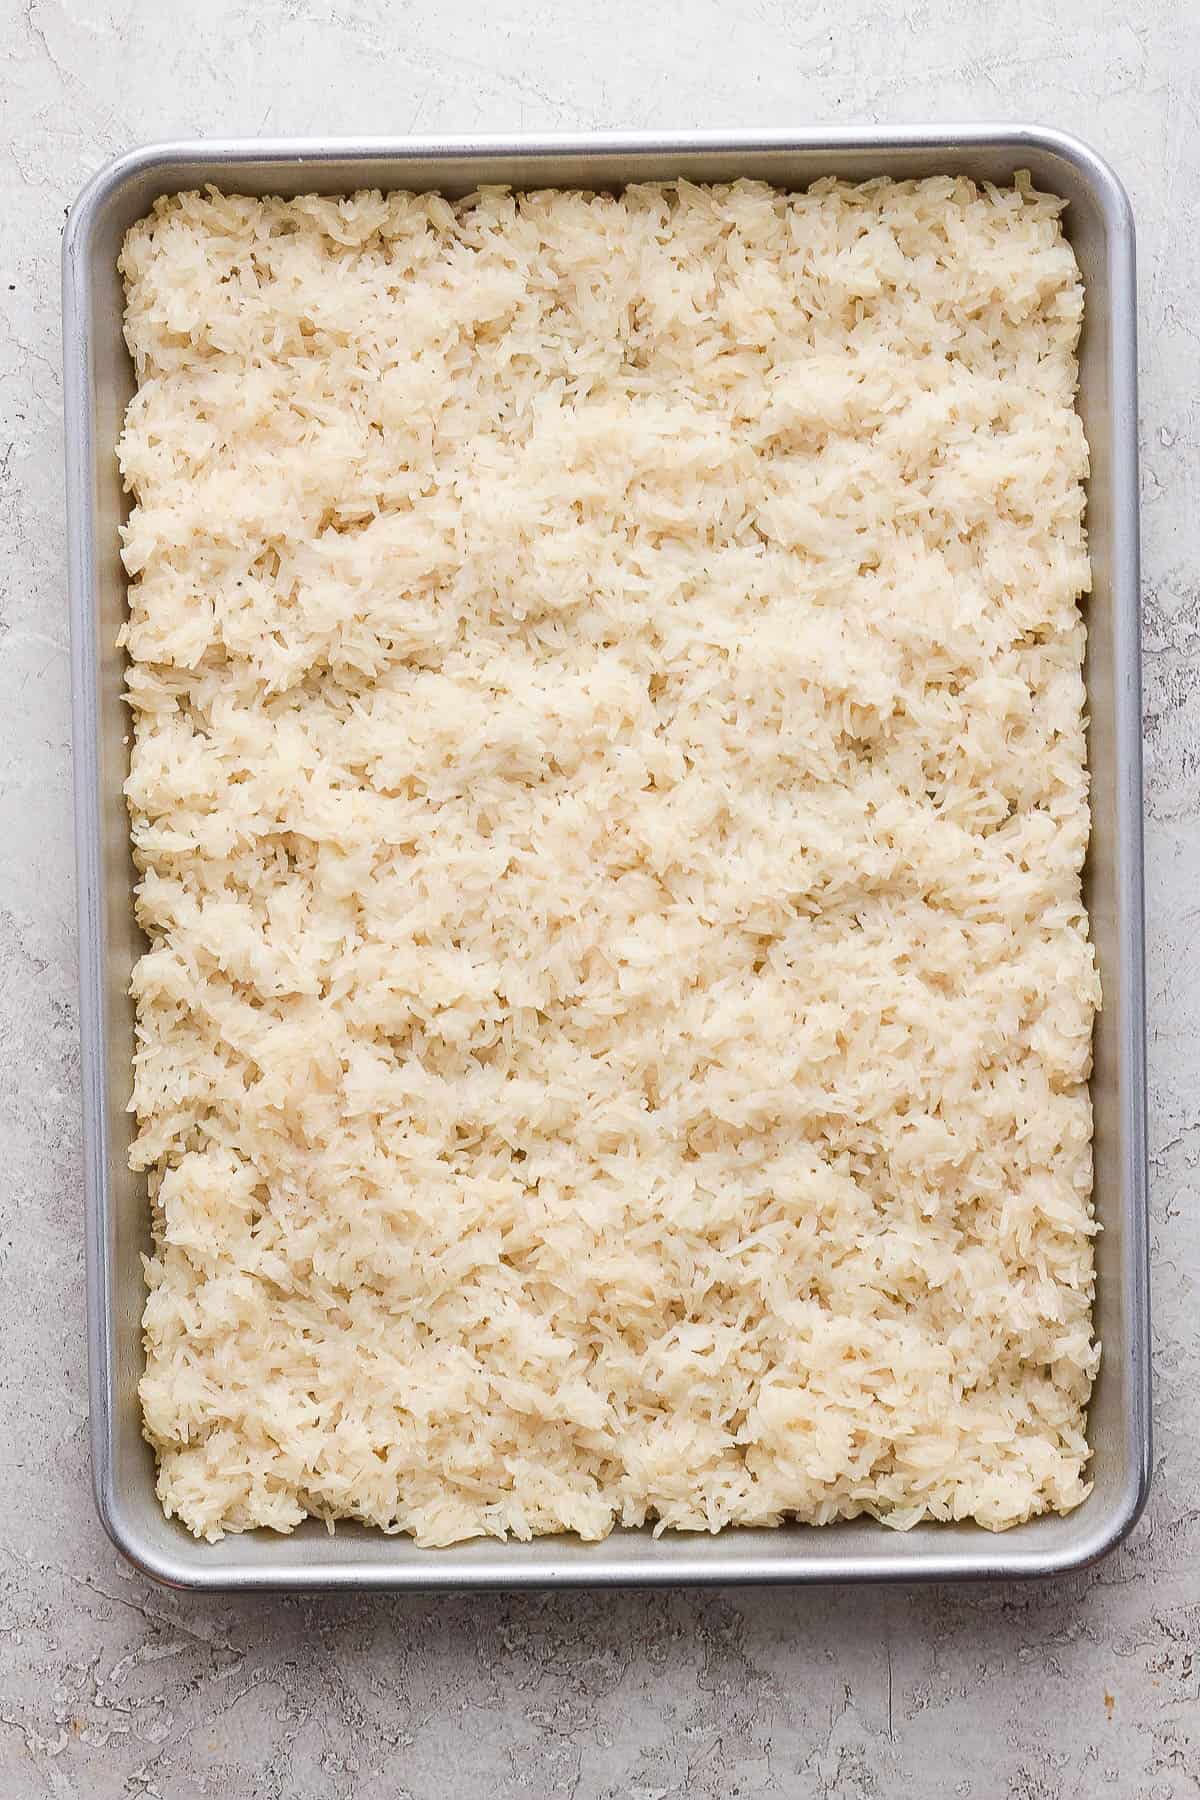 Rice in the baking pan before baking in the oven.